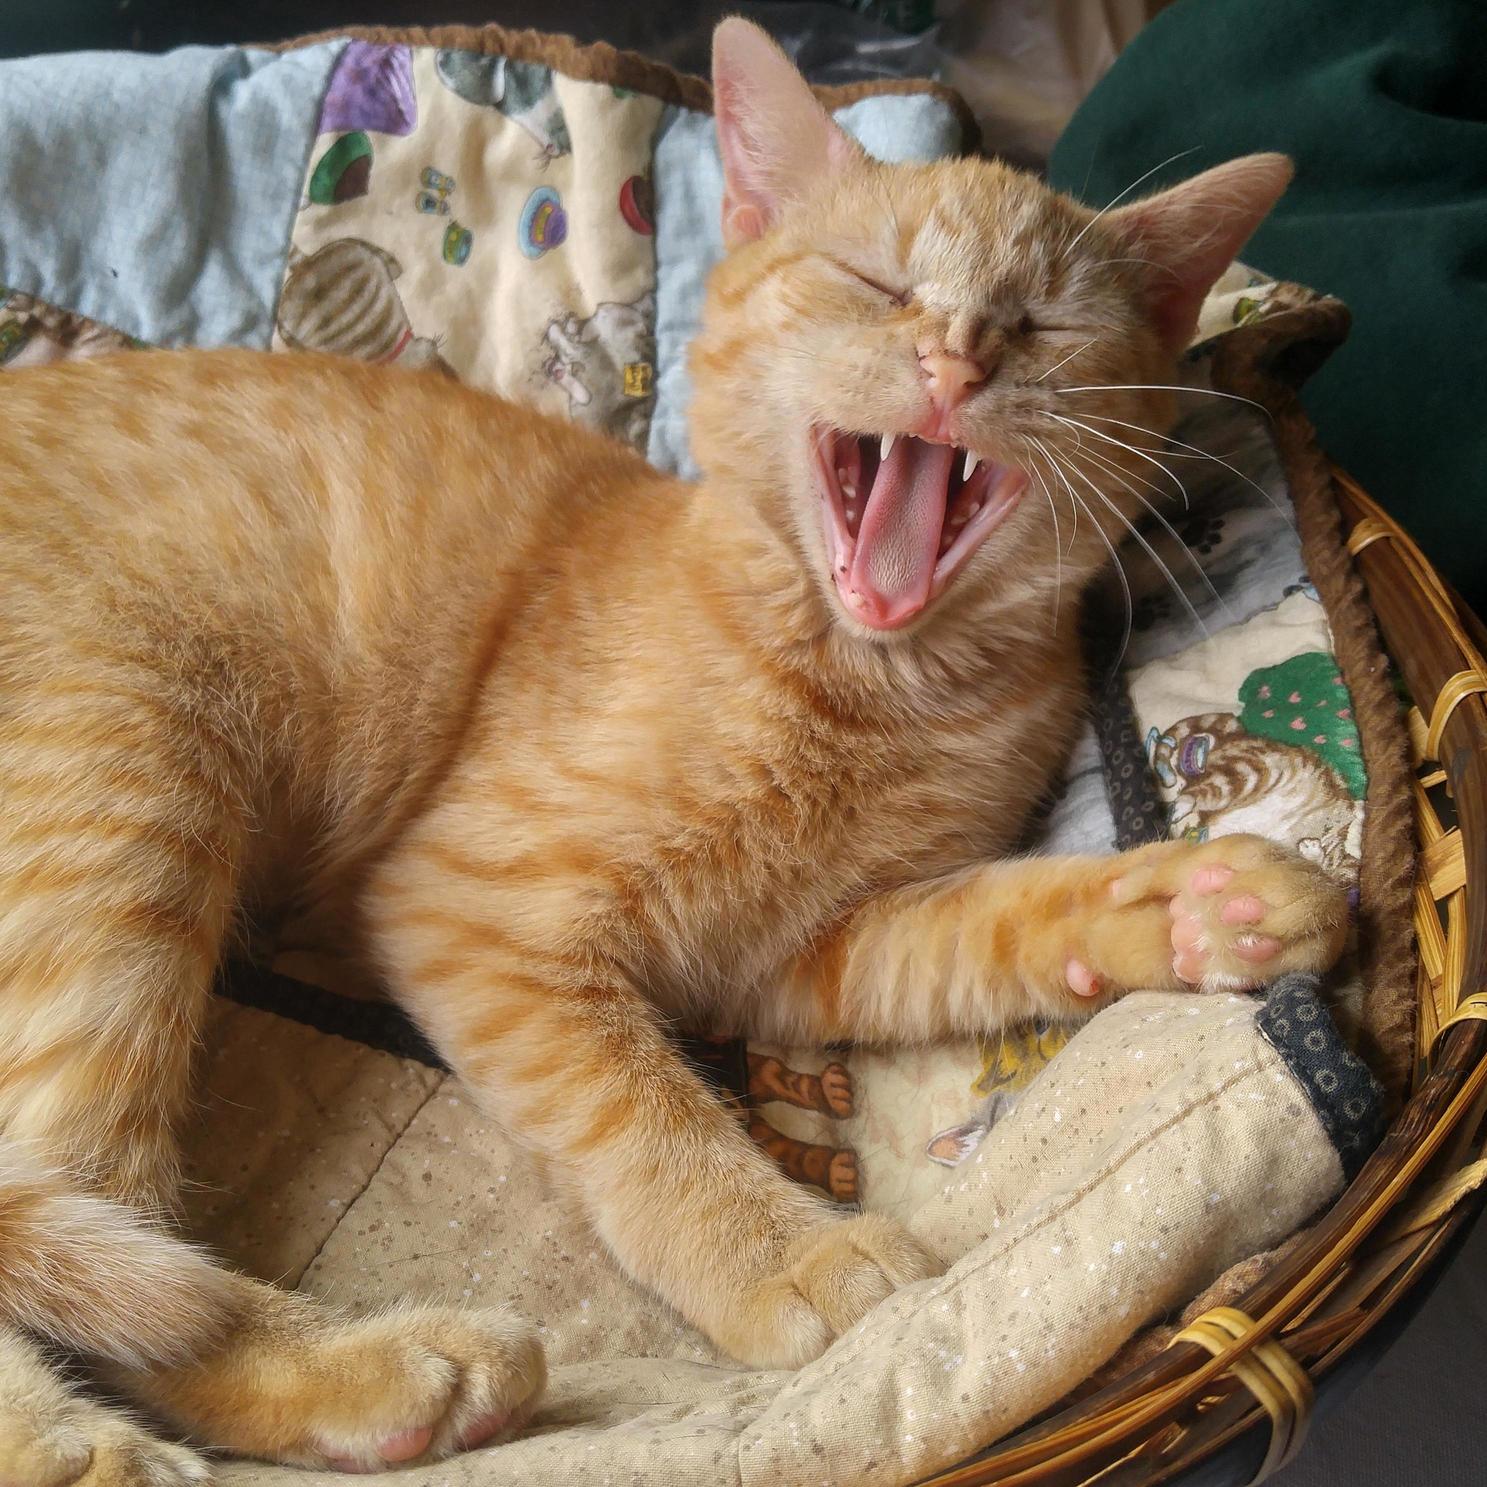 And now youre yawning too.